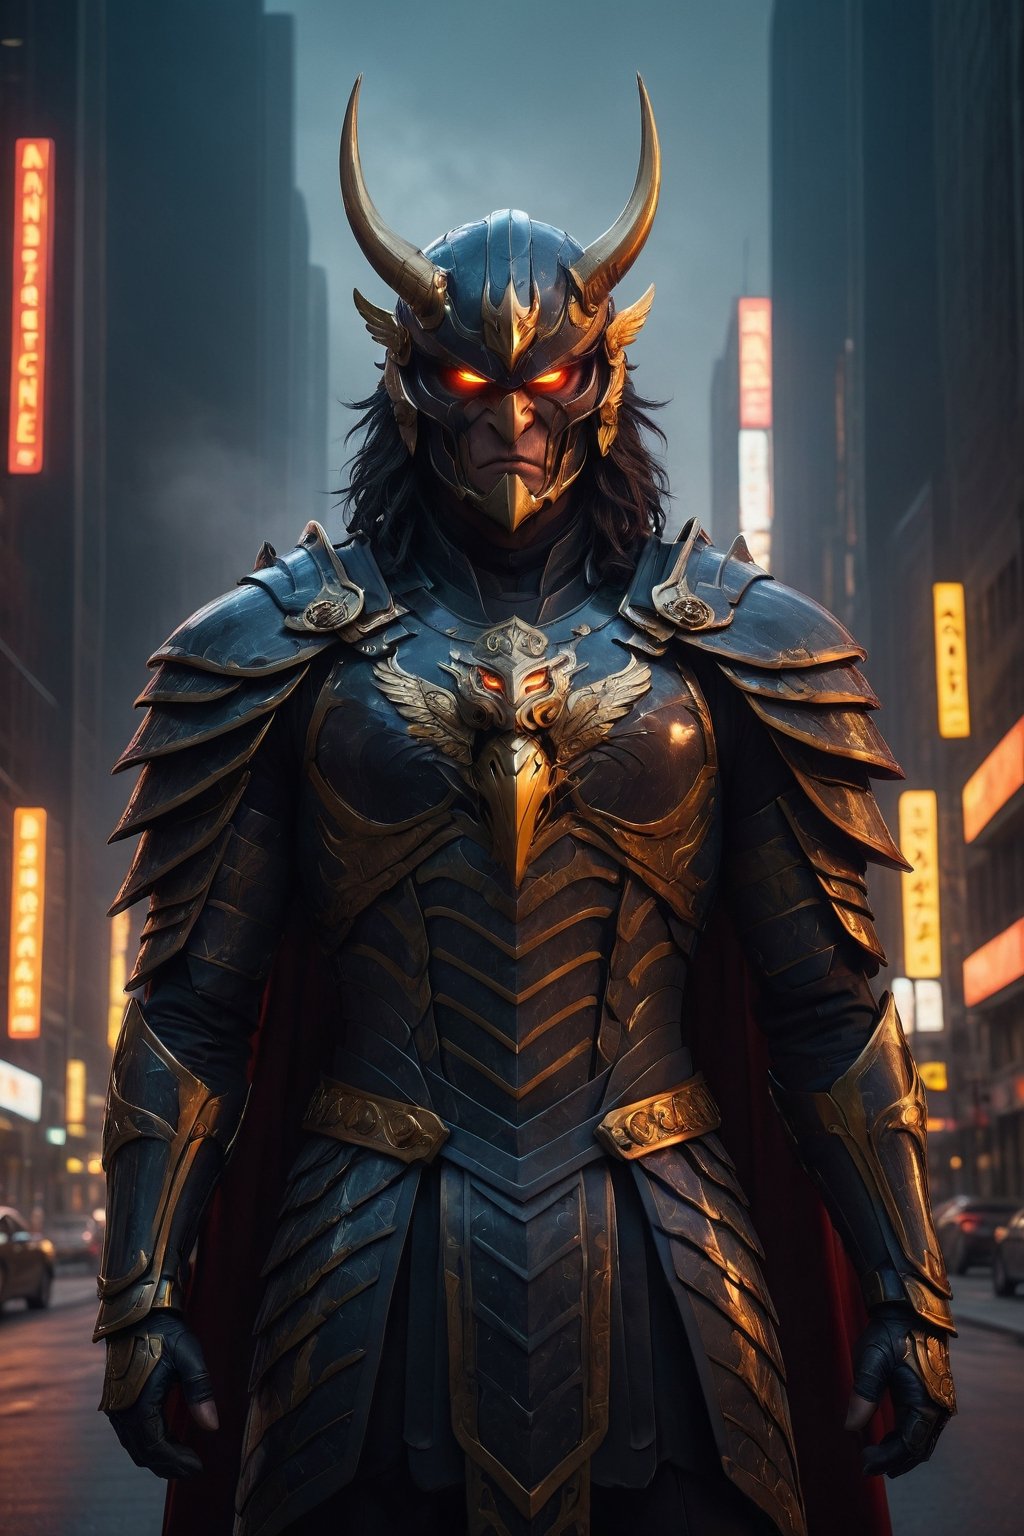 Eagle man, eagle face, horns, villain cape, angry, glowing eyes and an aura of rage surrounding him, cinematic style, anamorphic lens, black fog filter, film grain, perfect composition, film grain, film lighting, good composition, good anatomy, intimidating, american cityscape,

